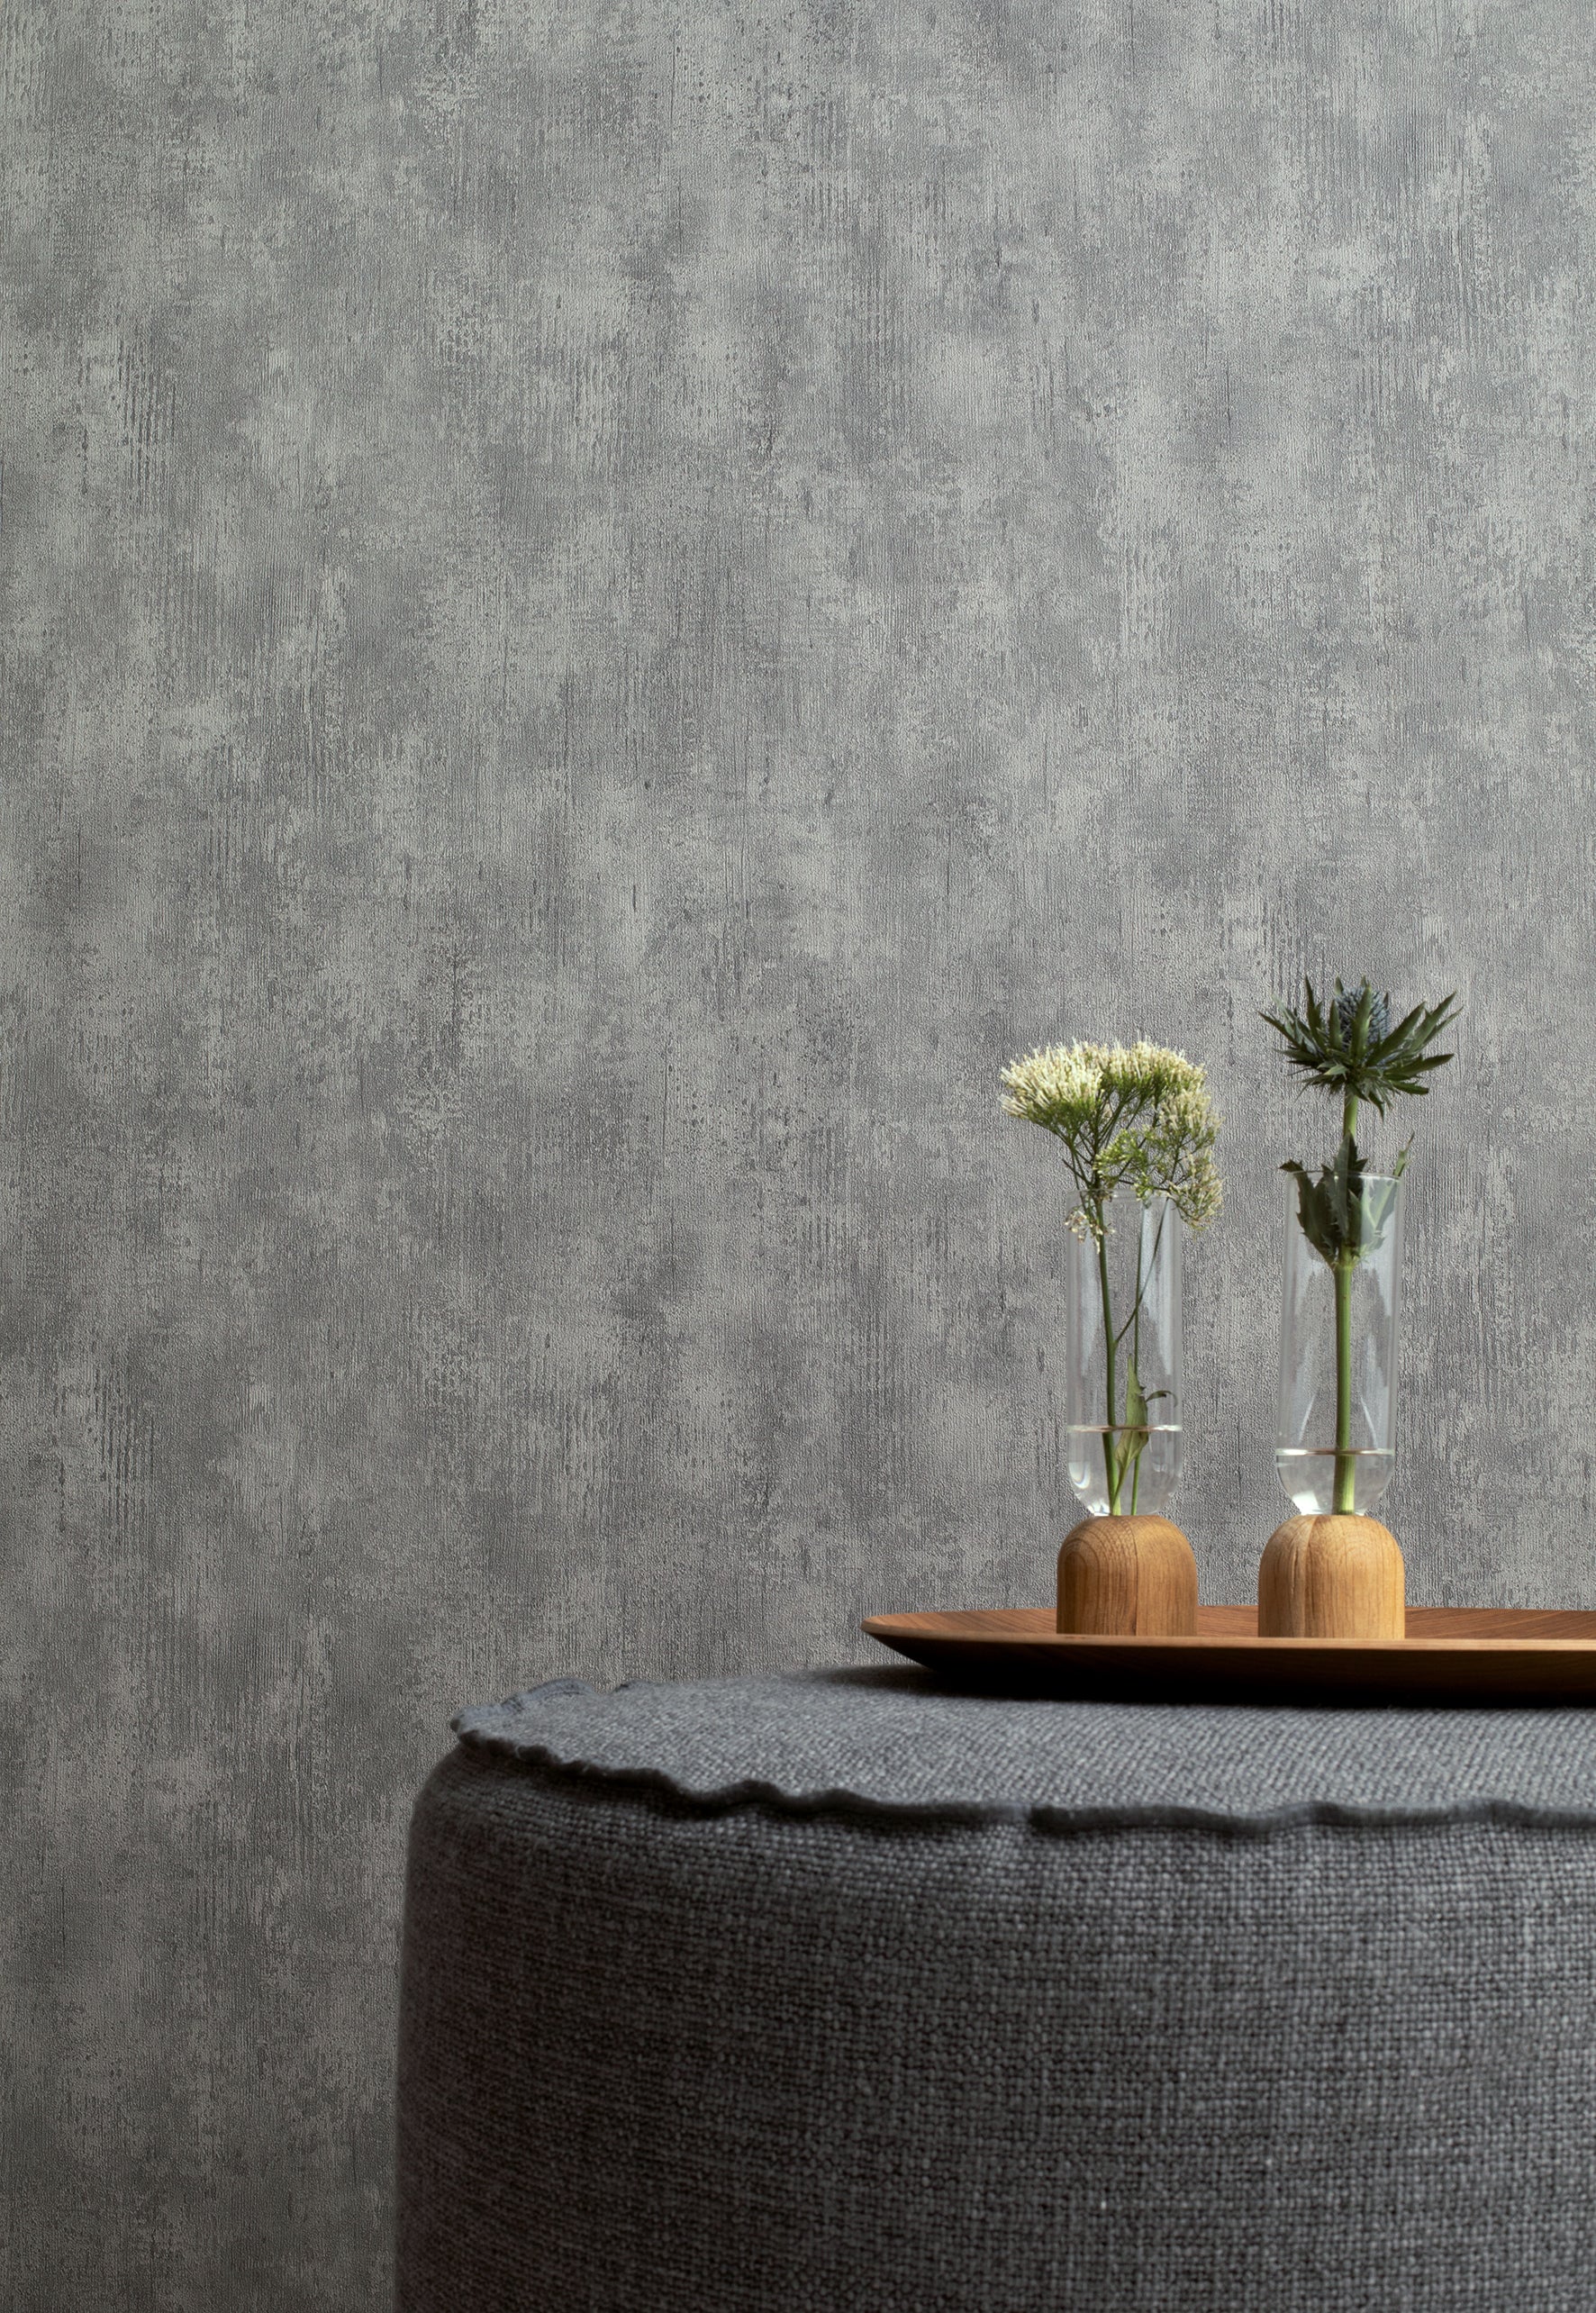 Galerie MB Industrial  Wallcovering